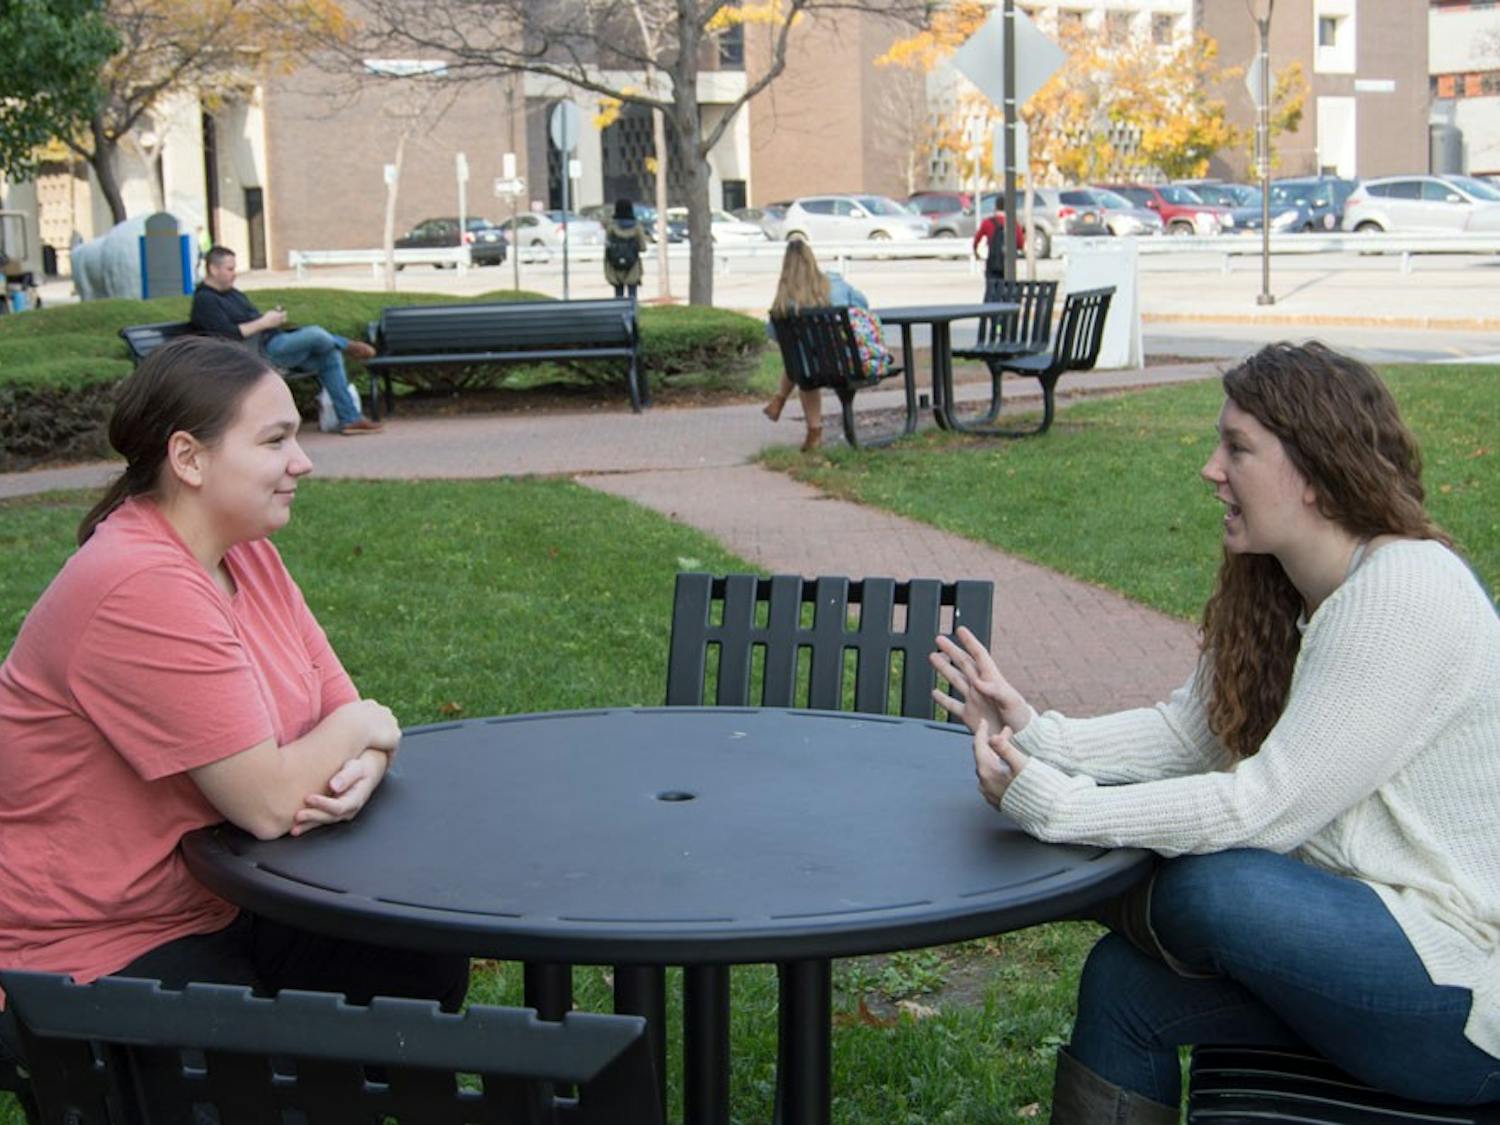 Danielle Dispenza (right) and Sarah Fullington (left) sit outside of the Student Union. Dispenza said she will vote for Hillary Clinton due to her disdain for Donald Trump and Fullington said she will not vote at all.